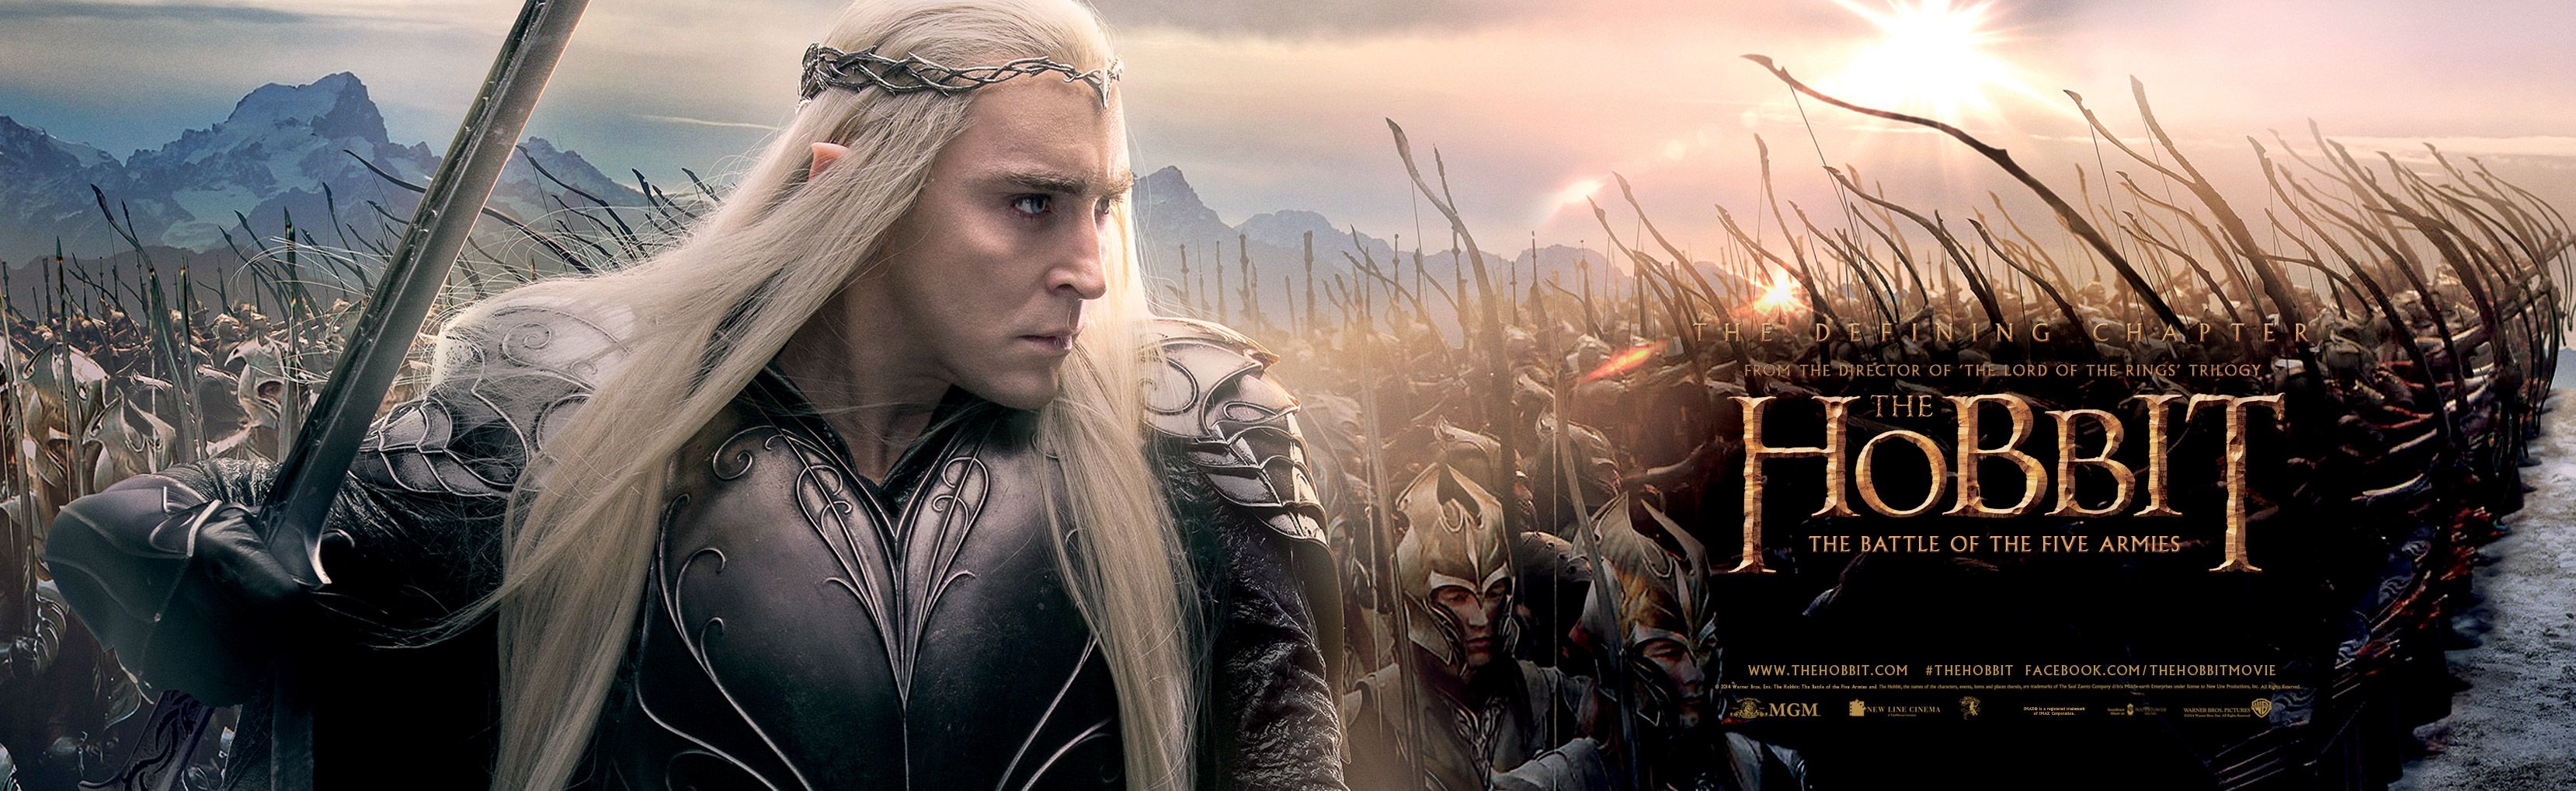 The Hobbit: The Battle of the Five Armies – Official Movie Site